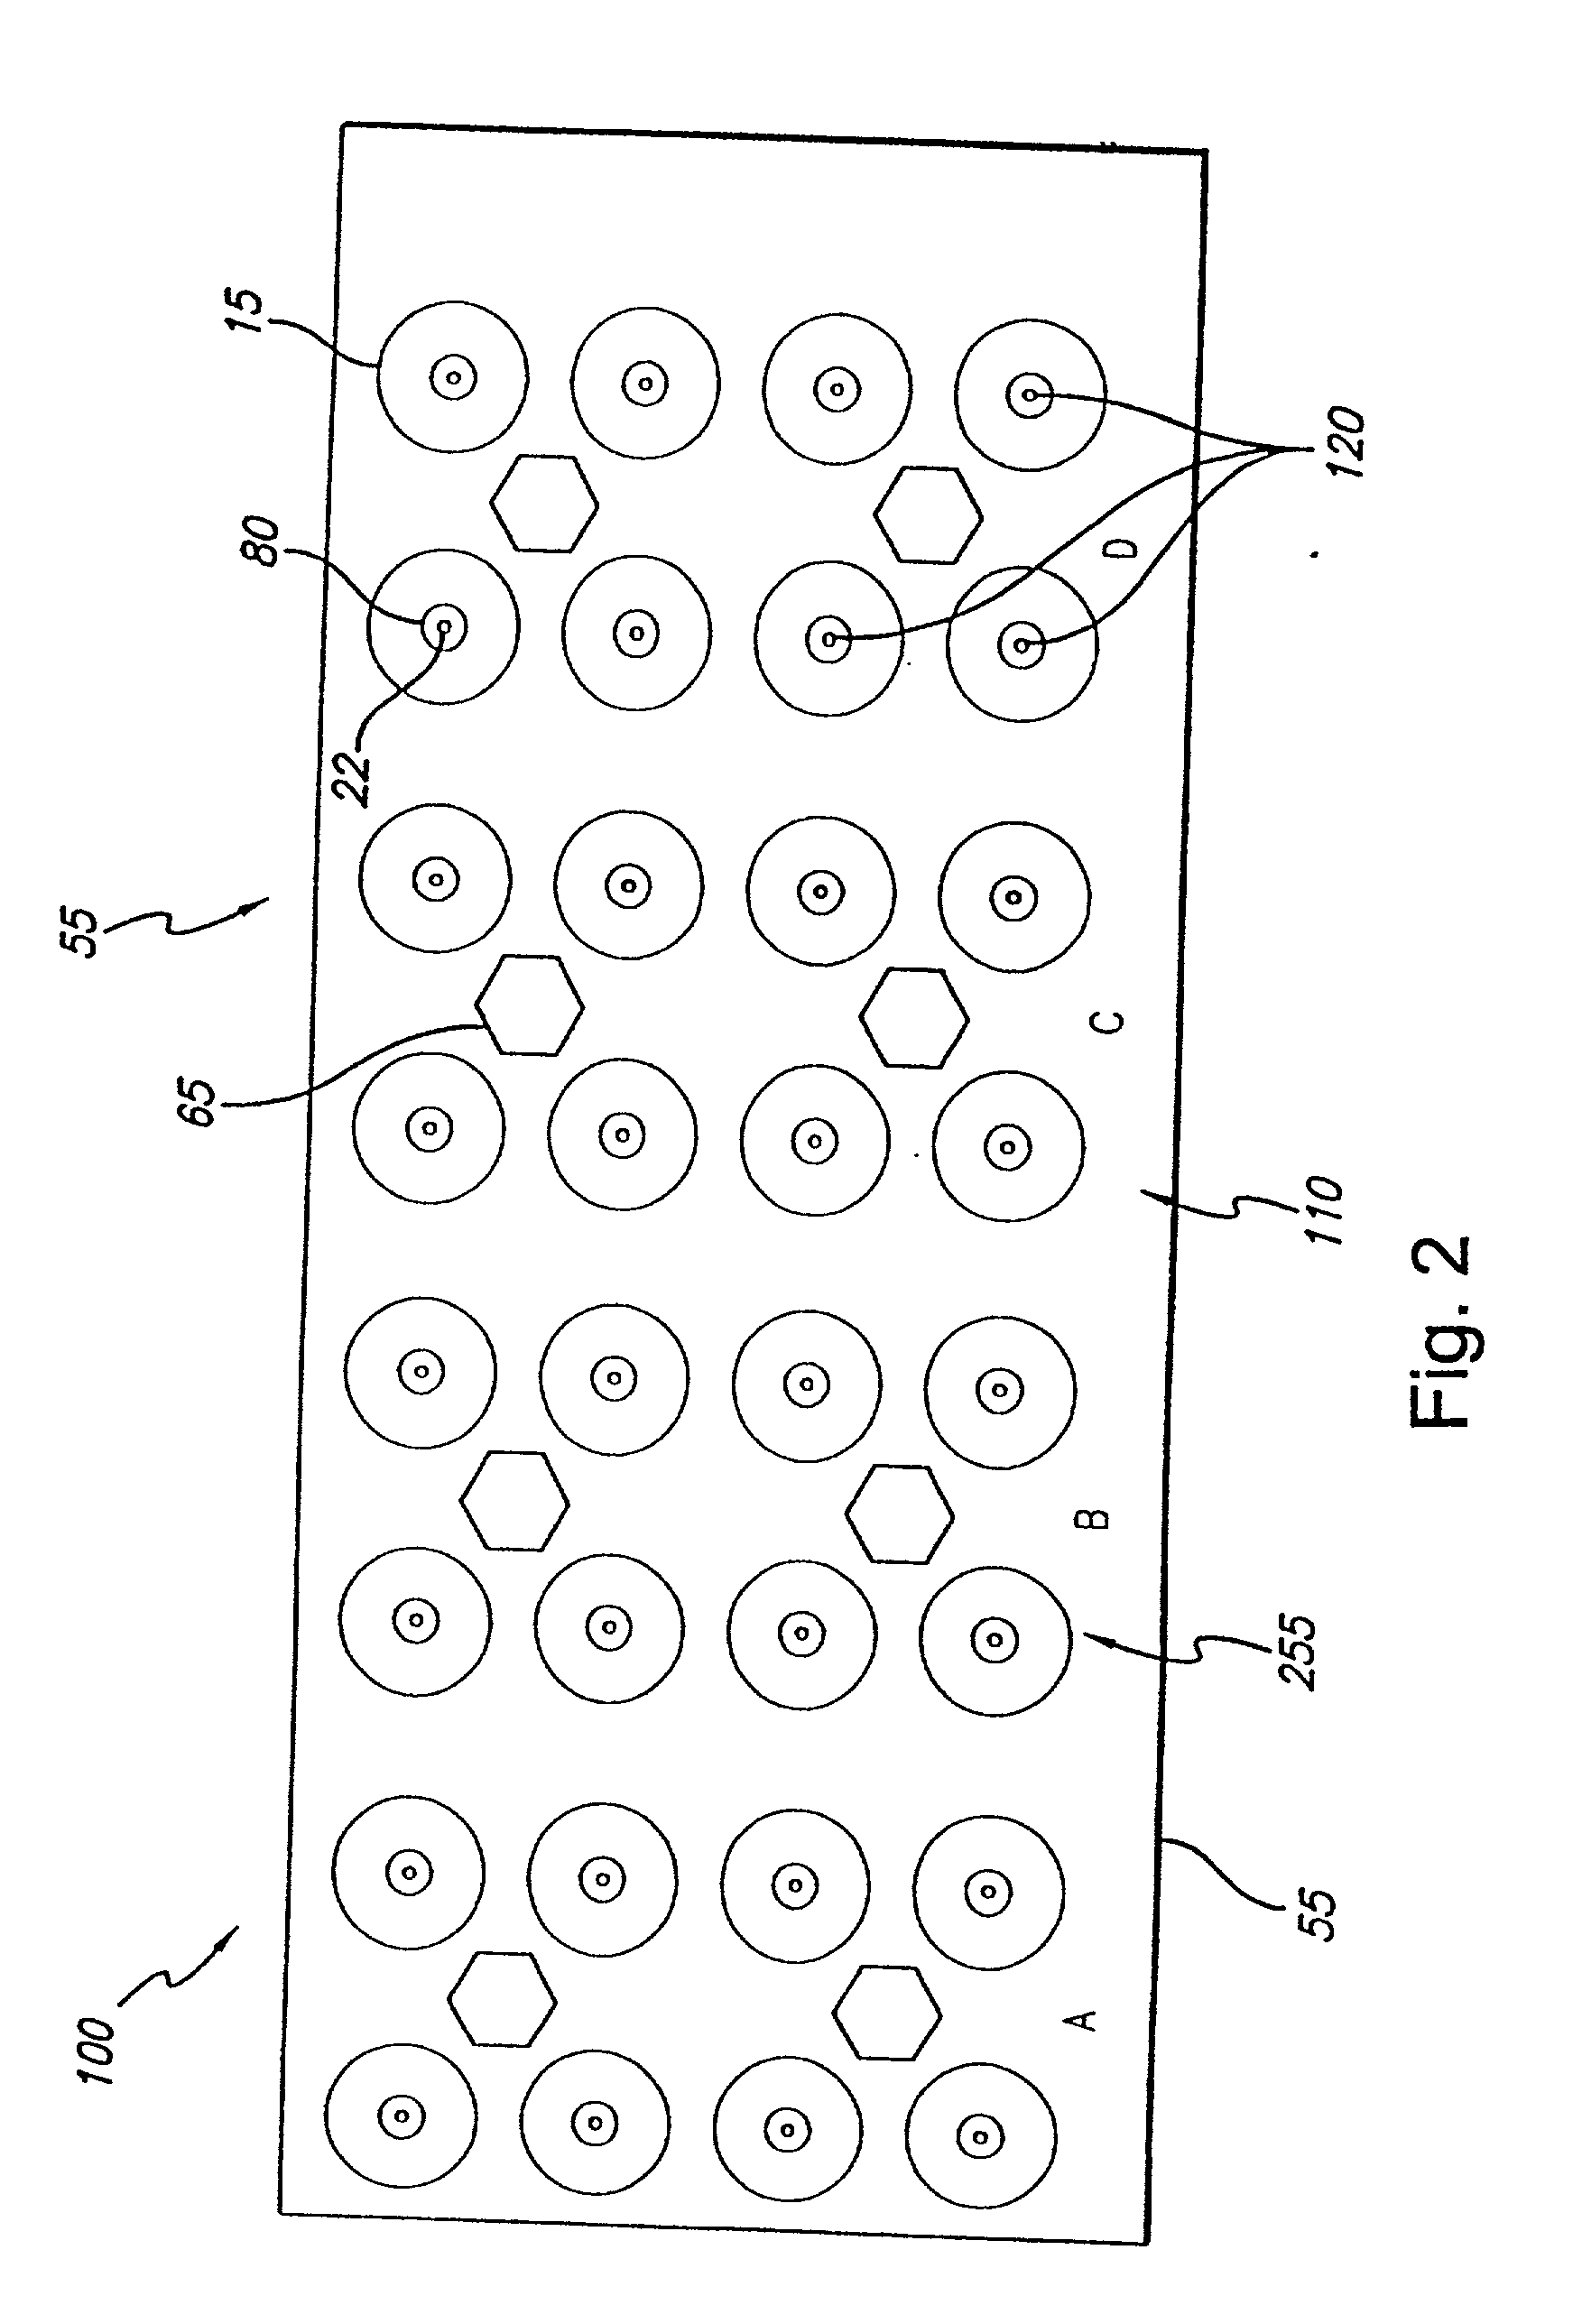 Method and apparatus for performing multiple processing steps on a sample in a single vessel